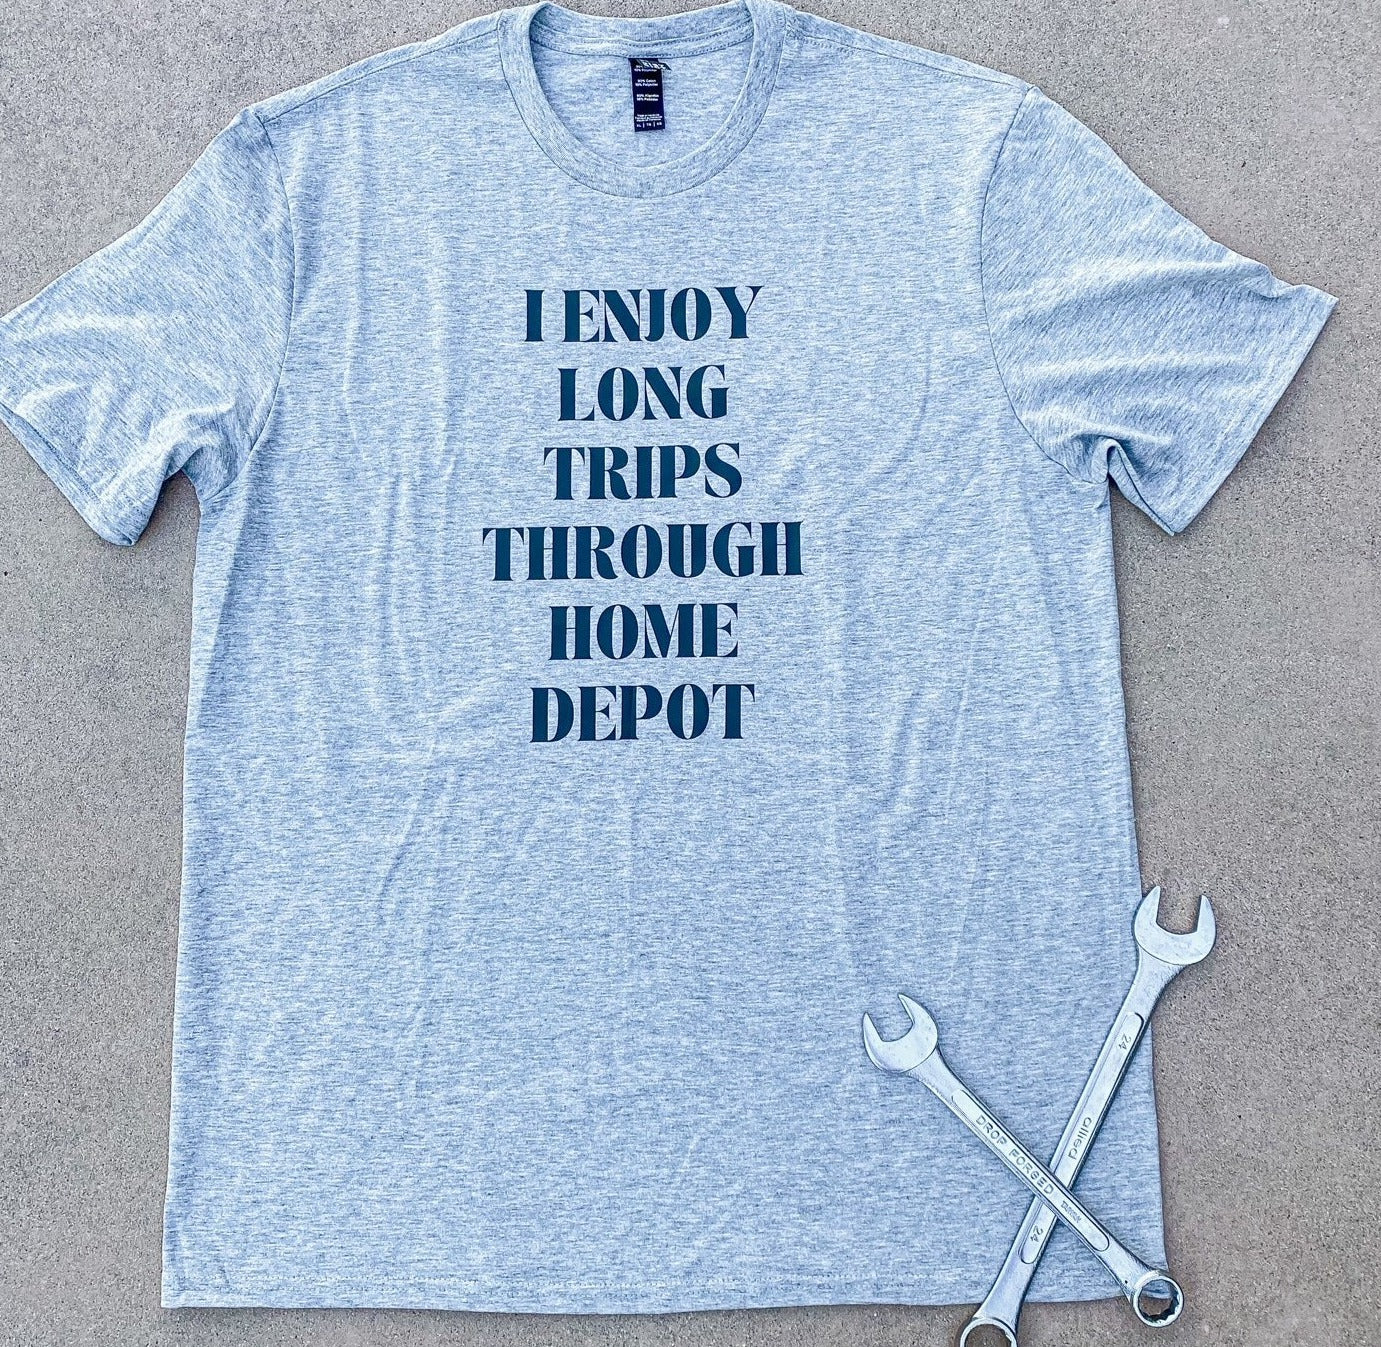 Grey t-shirt with "I ENJOY LONG TRIPS THROUGH HOME DEPOT" printed on the front in black